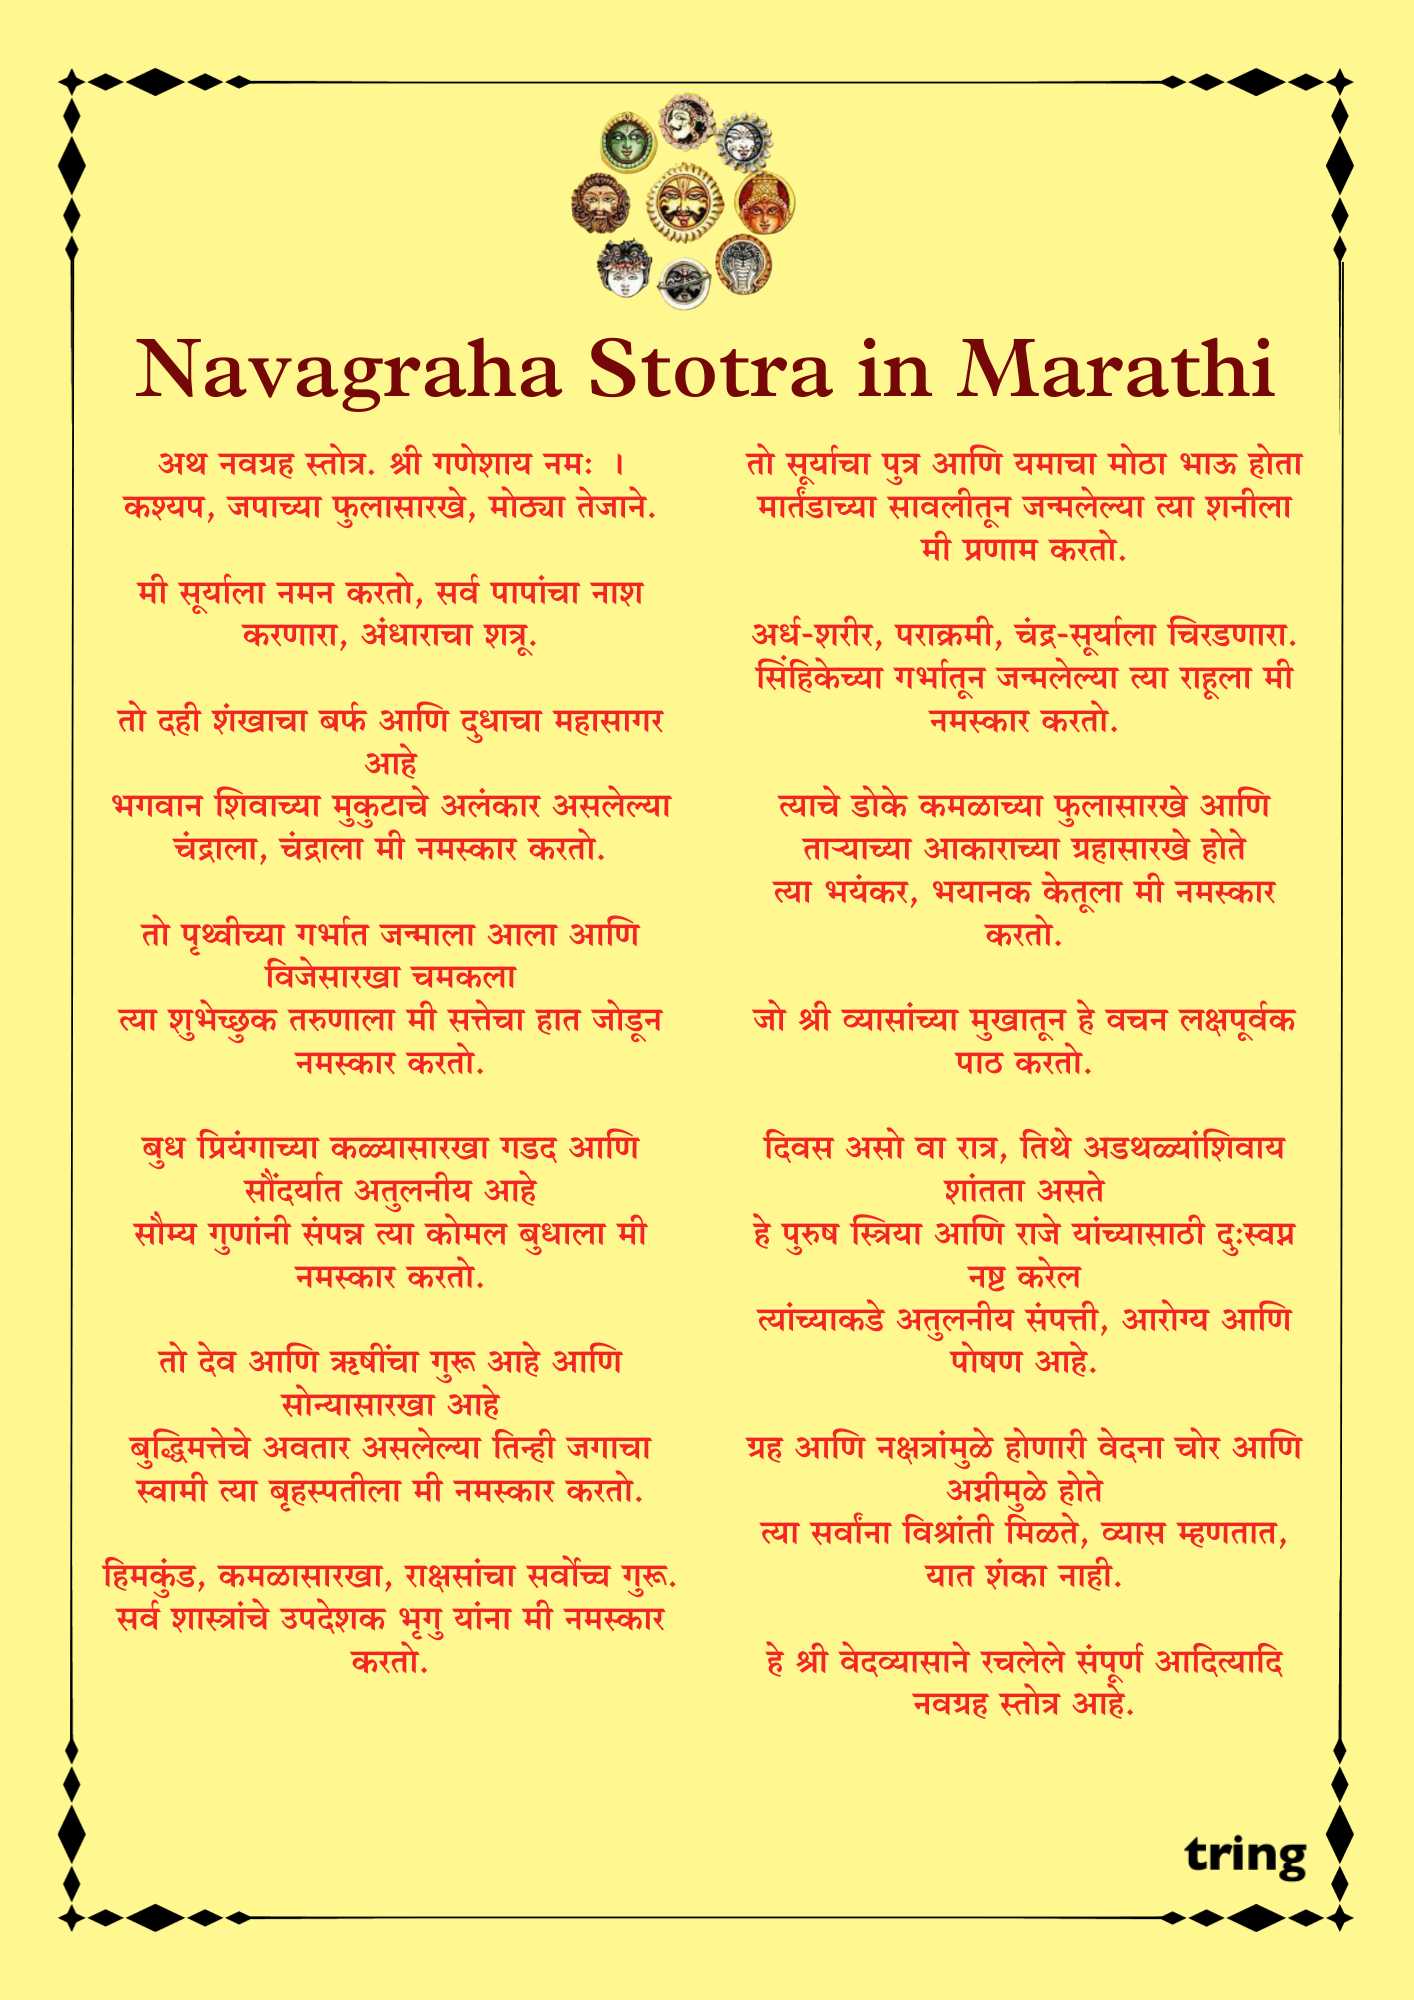 Navagraha Stotra Images (1)